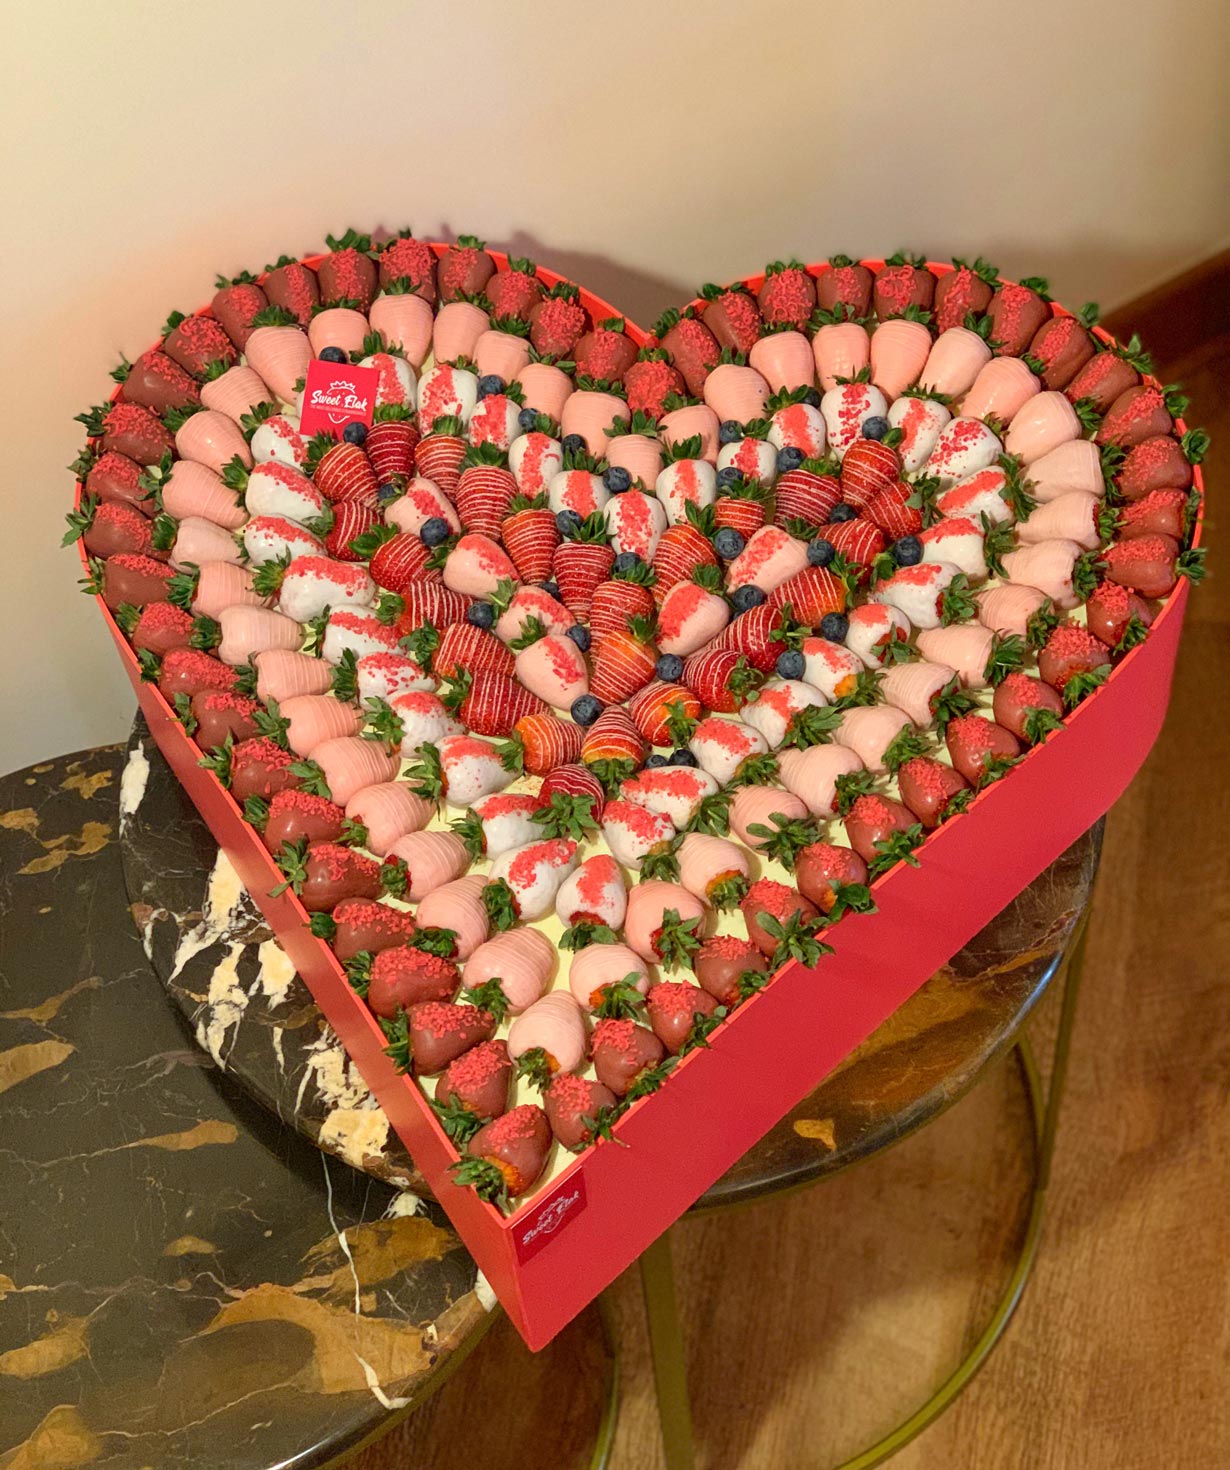 Heart-shaped composition `Sweet Elak` with chocolate covered strawberries